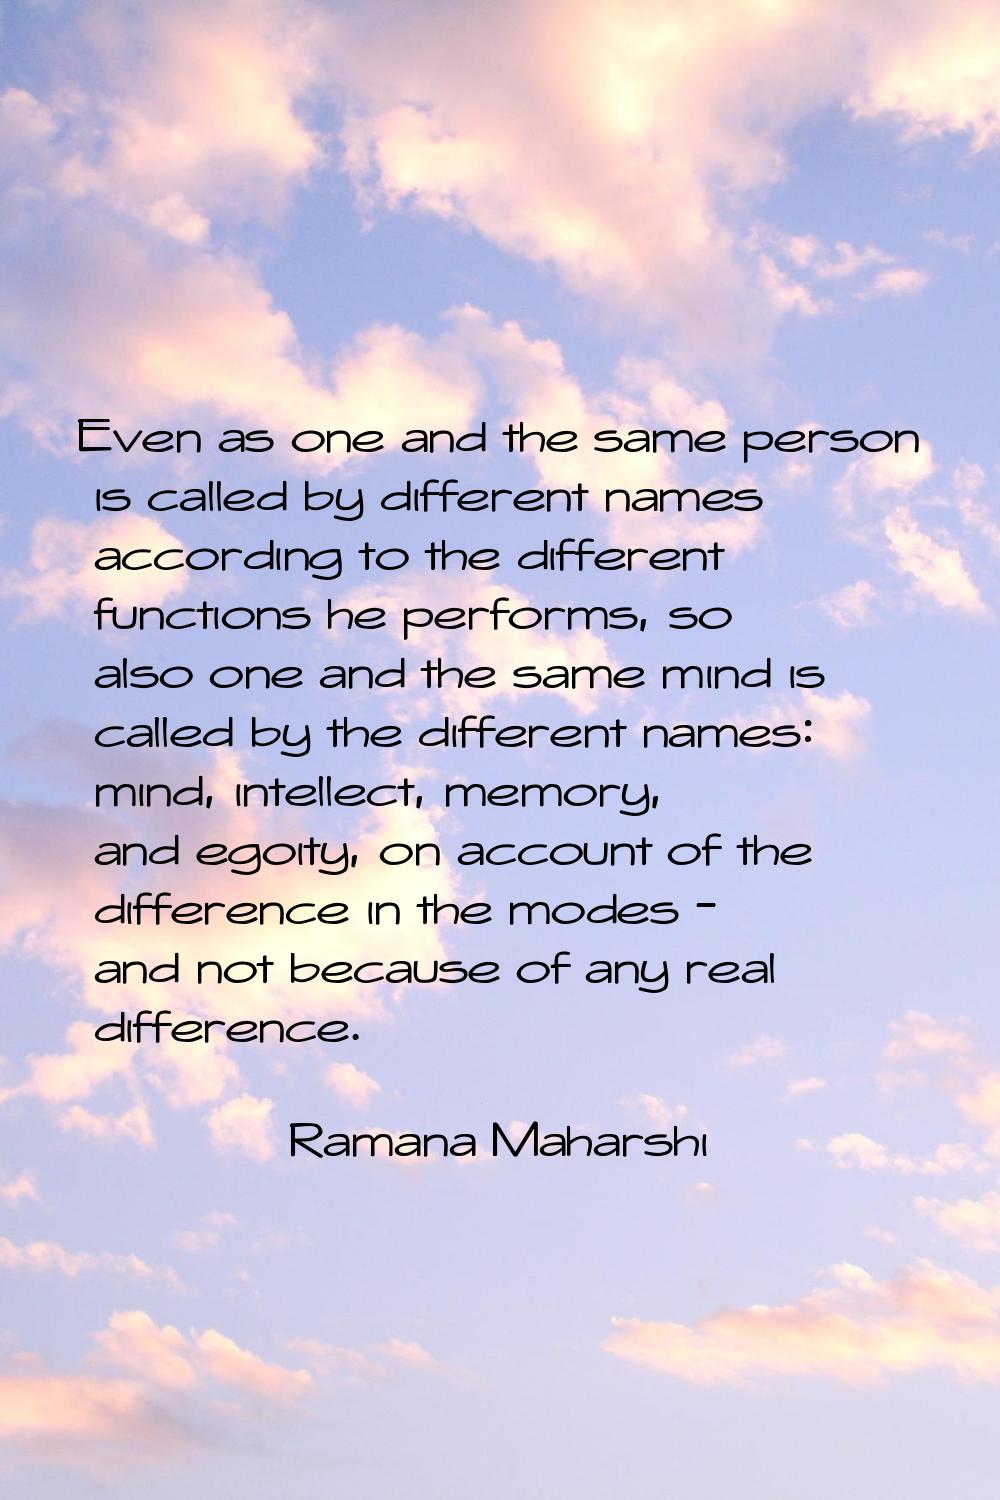 Even as one and the same person is called by different names according to the different functions h